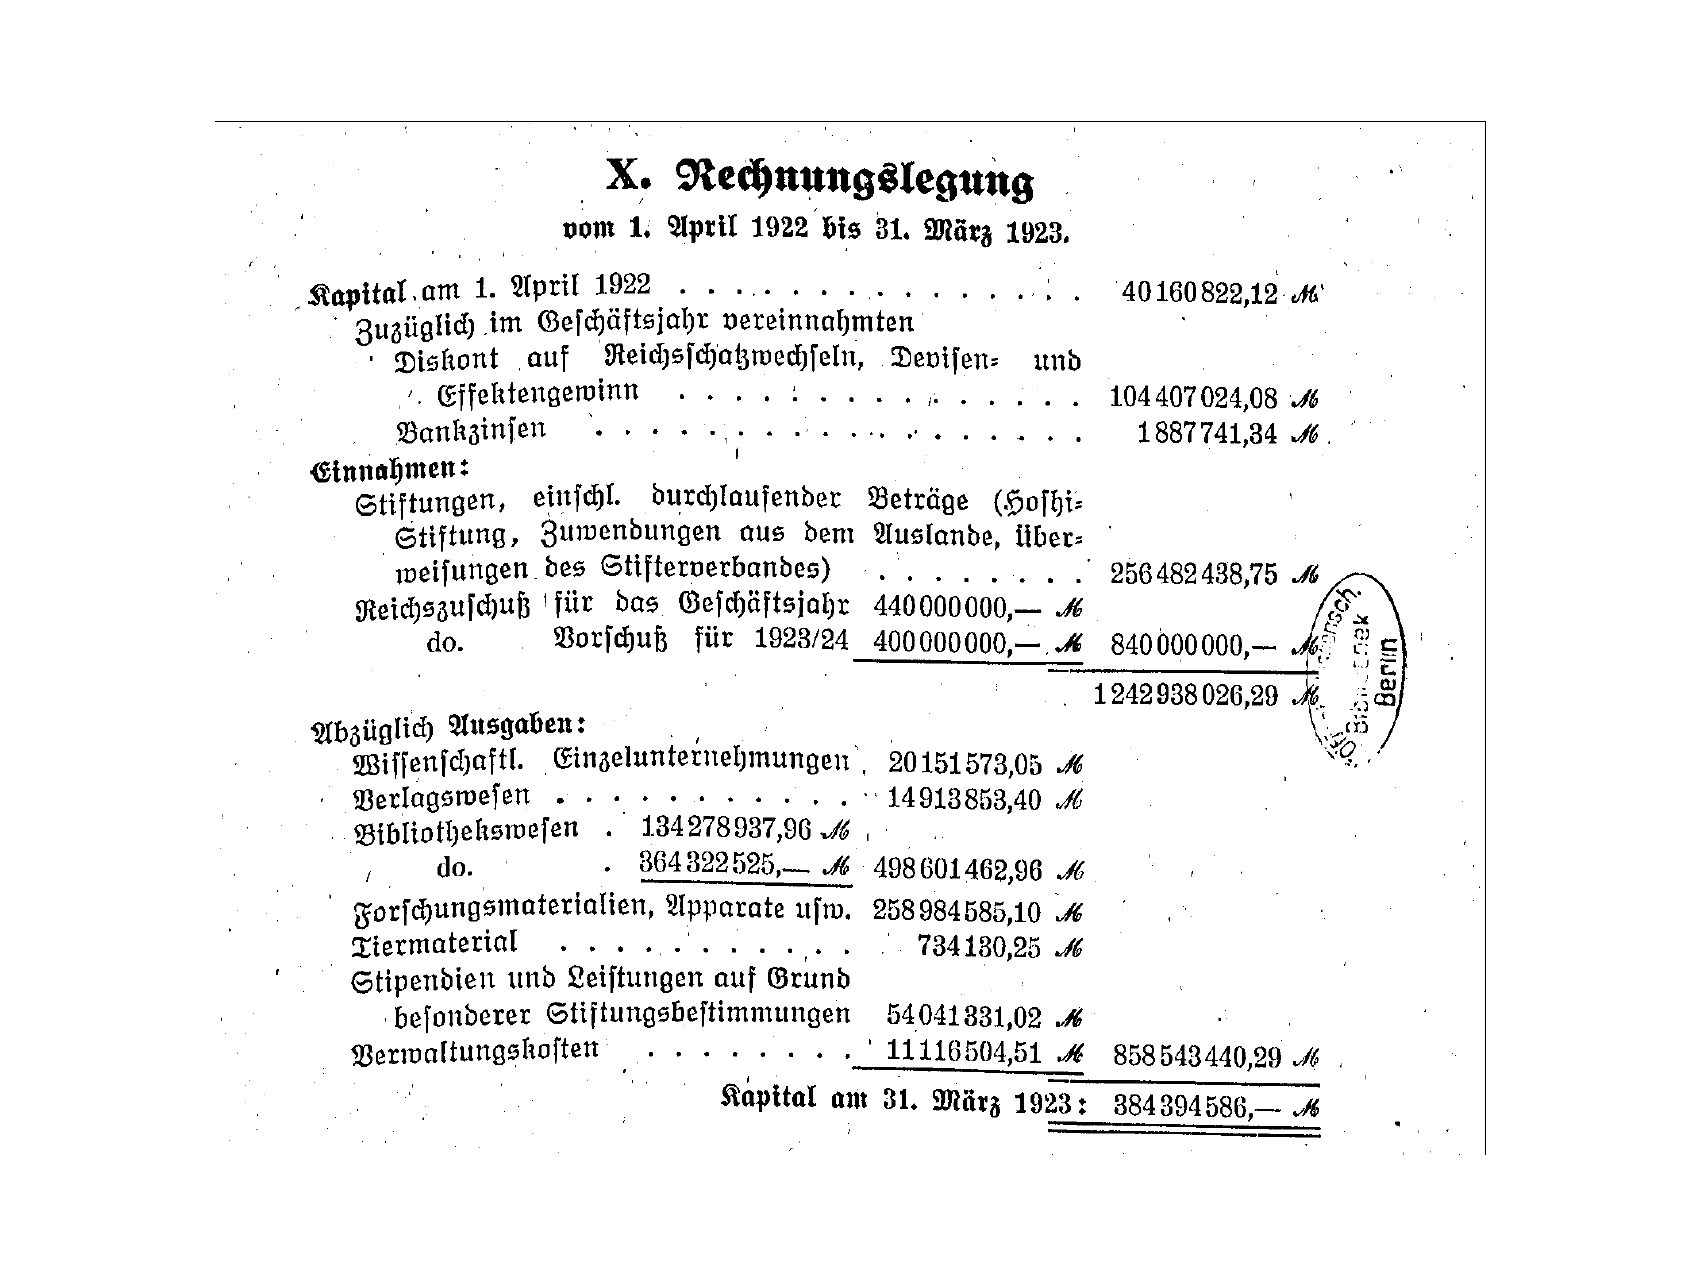 Excerpt from the balance sheet of the 1922/1923 financial year